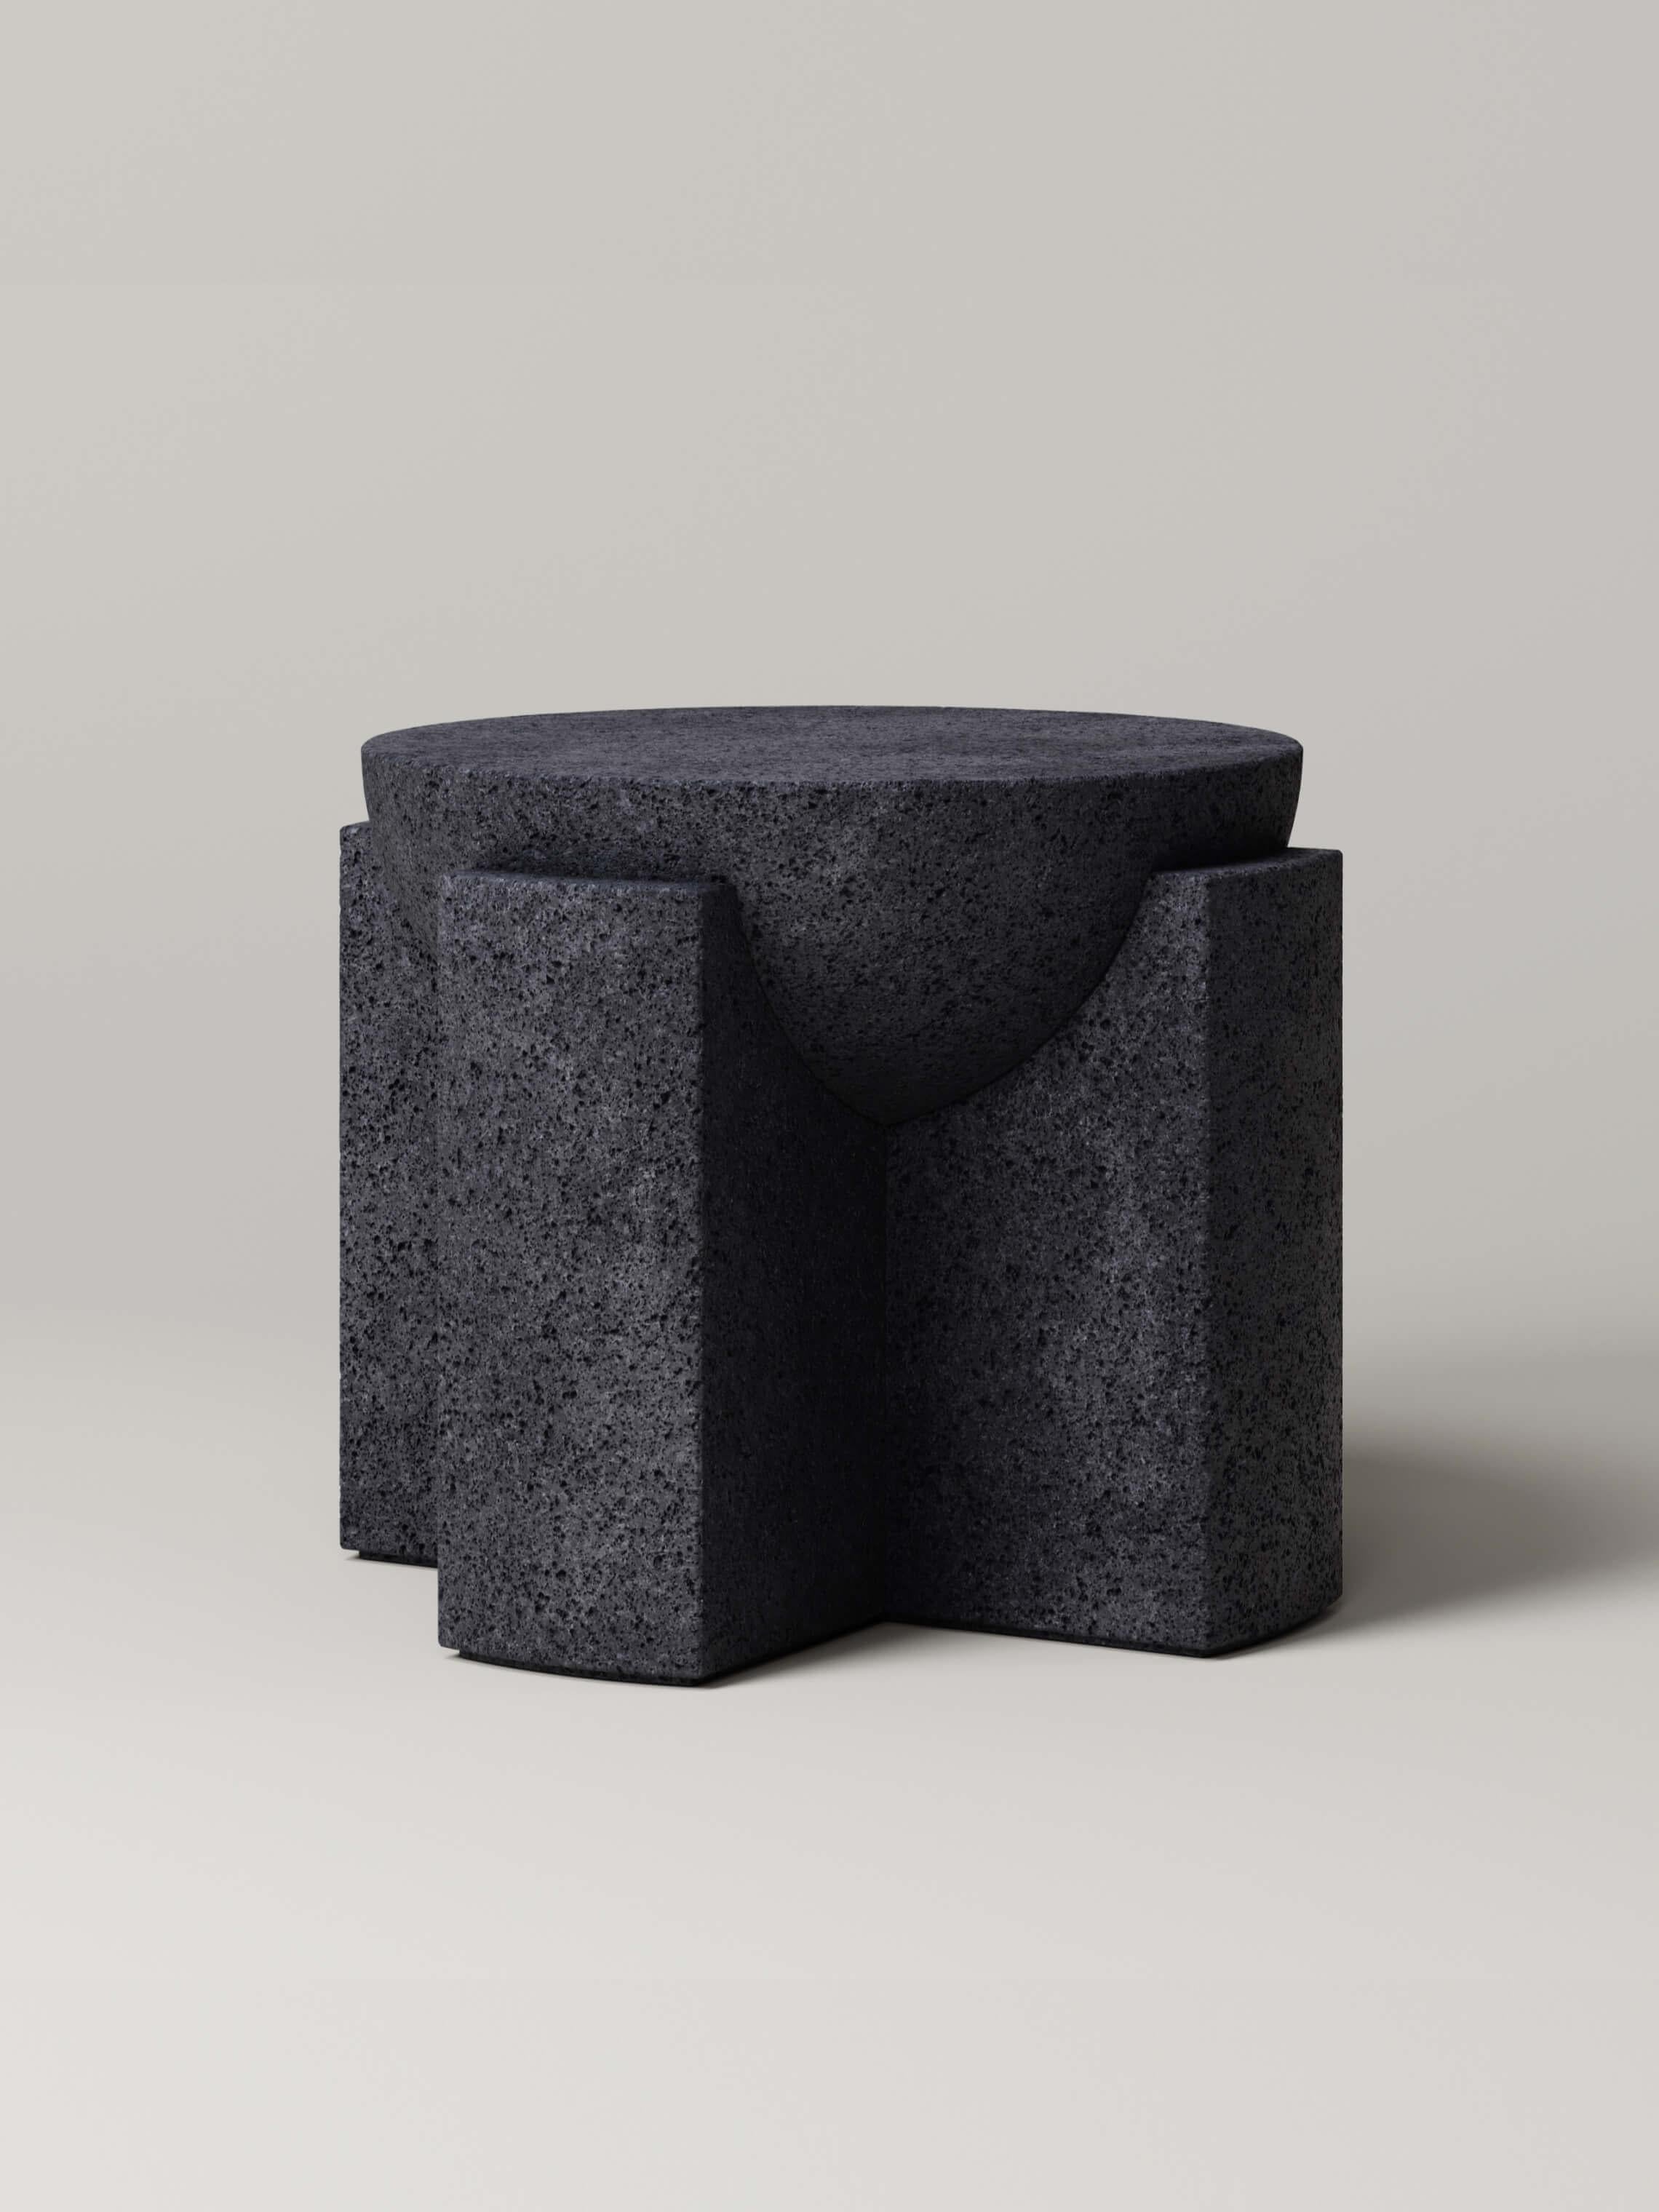 Carved M_002 Side Table designed by Studio Le Cann for Monolith Studio, Travertine For Sale